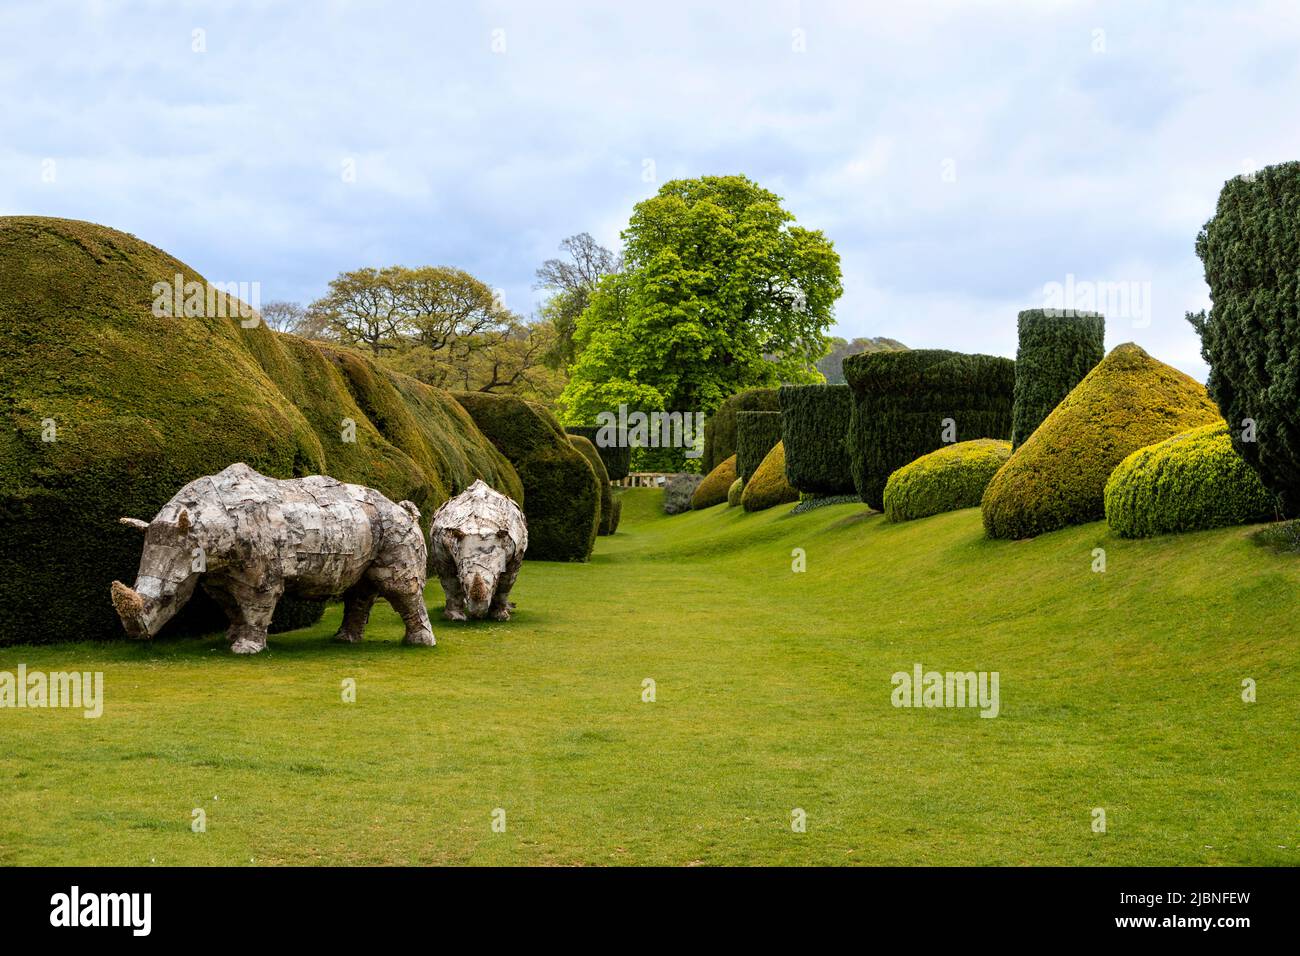 Rounded topiary surrounding the Queen’s Garden of Sudeley, Castle, Sudeley, Gloucestershire, Cotswolds, England, Great Britain, UK. Stock Photo